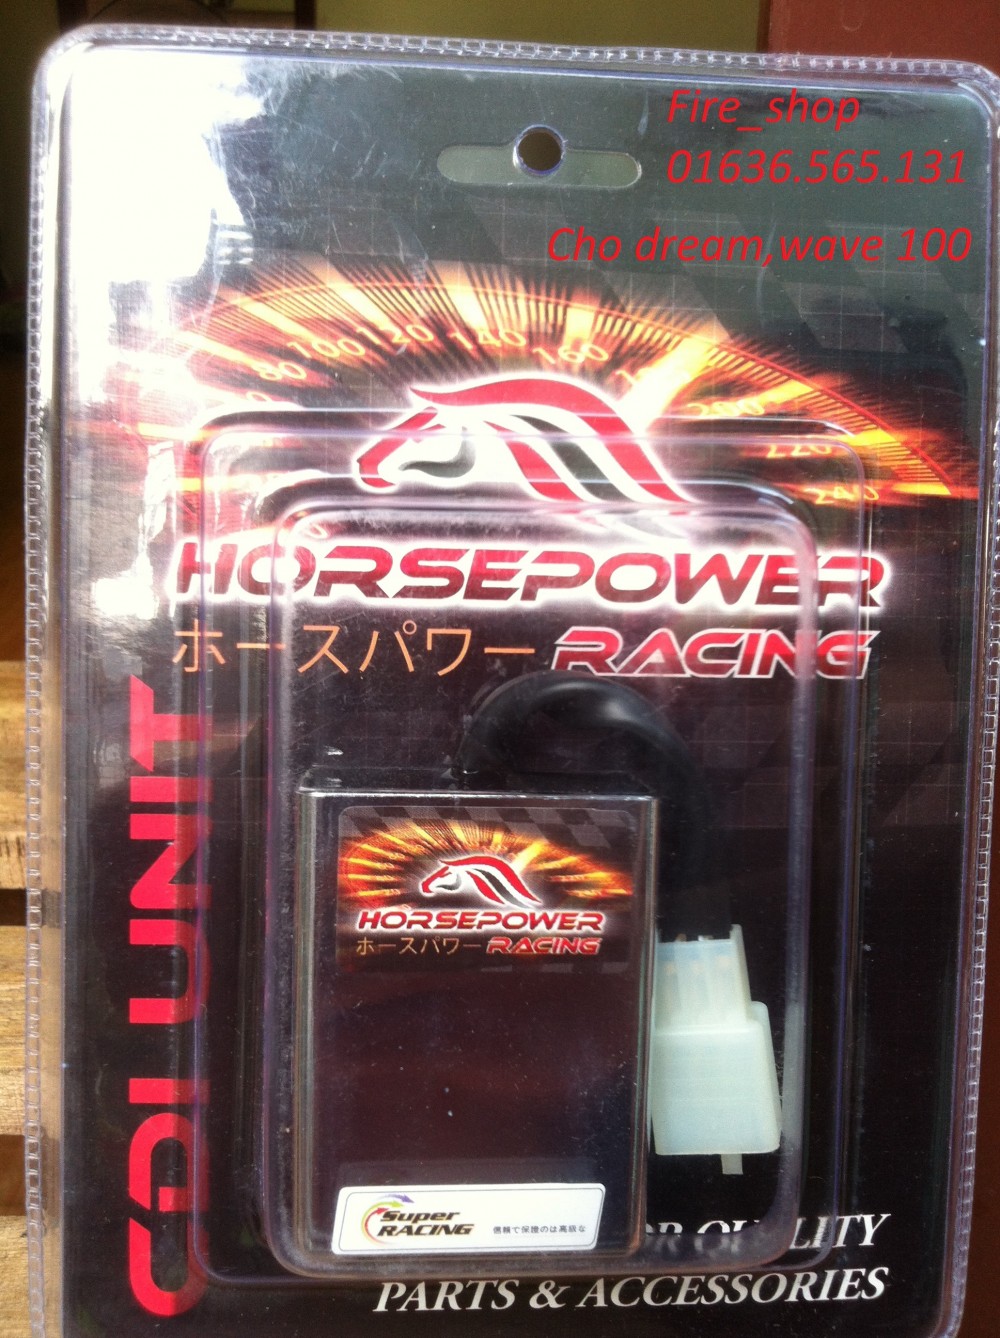 IC banjing horse power racing tim cho Exciter Dream Wave Fire_shop - 4